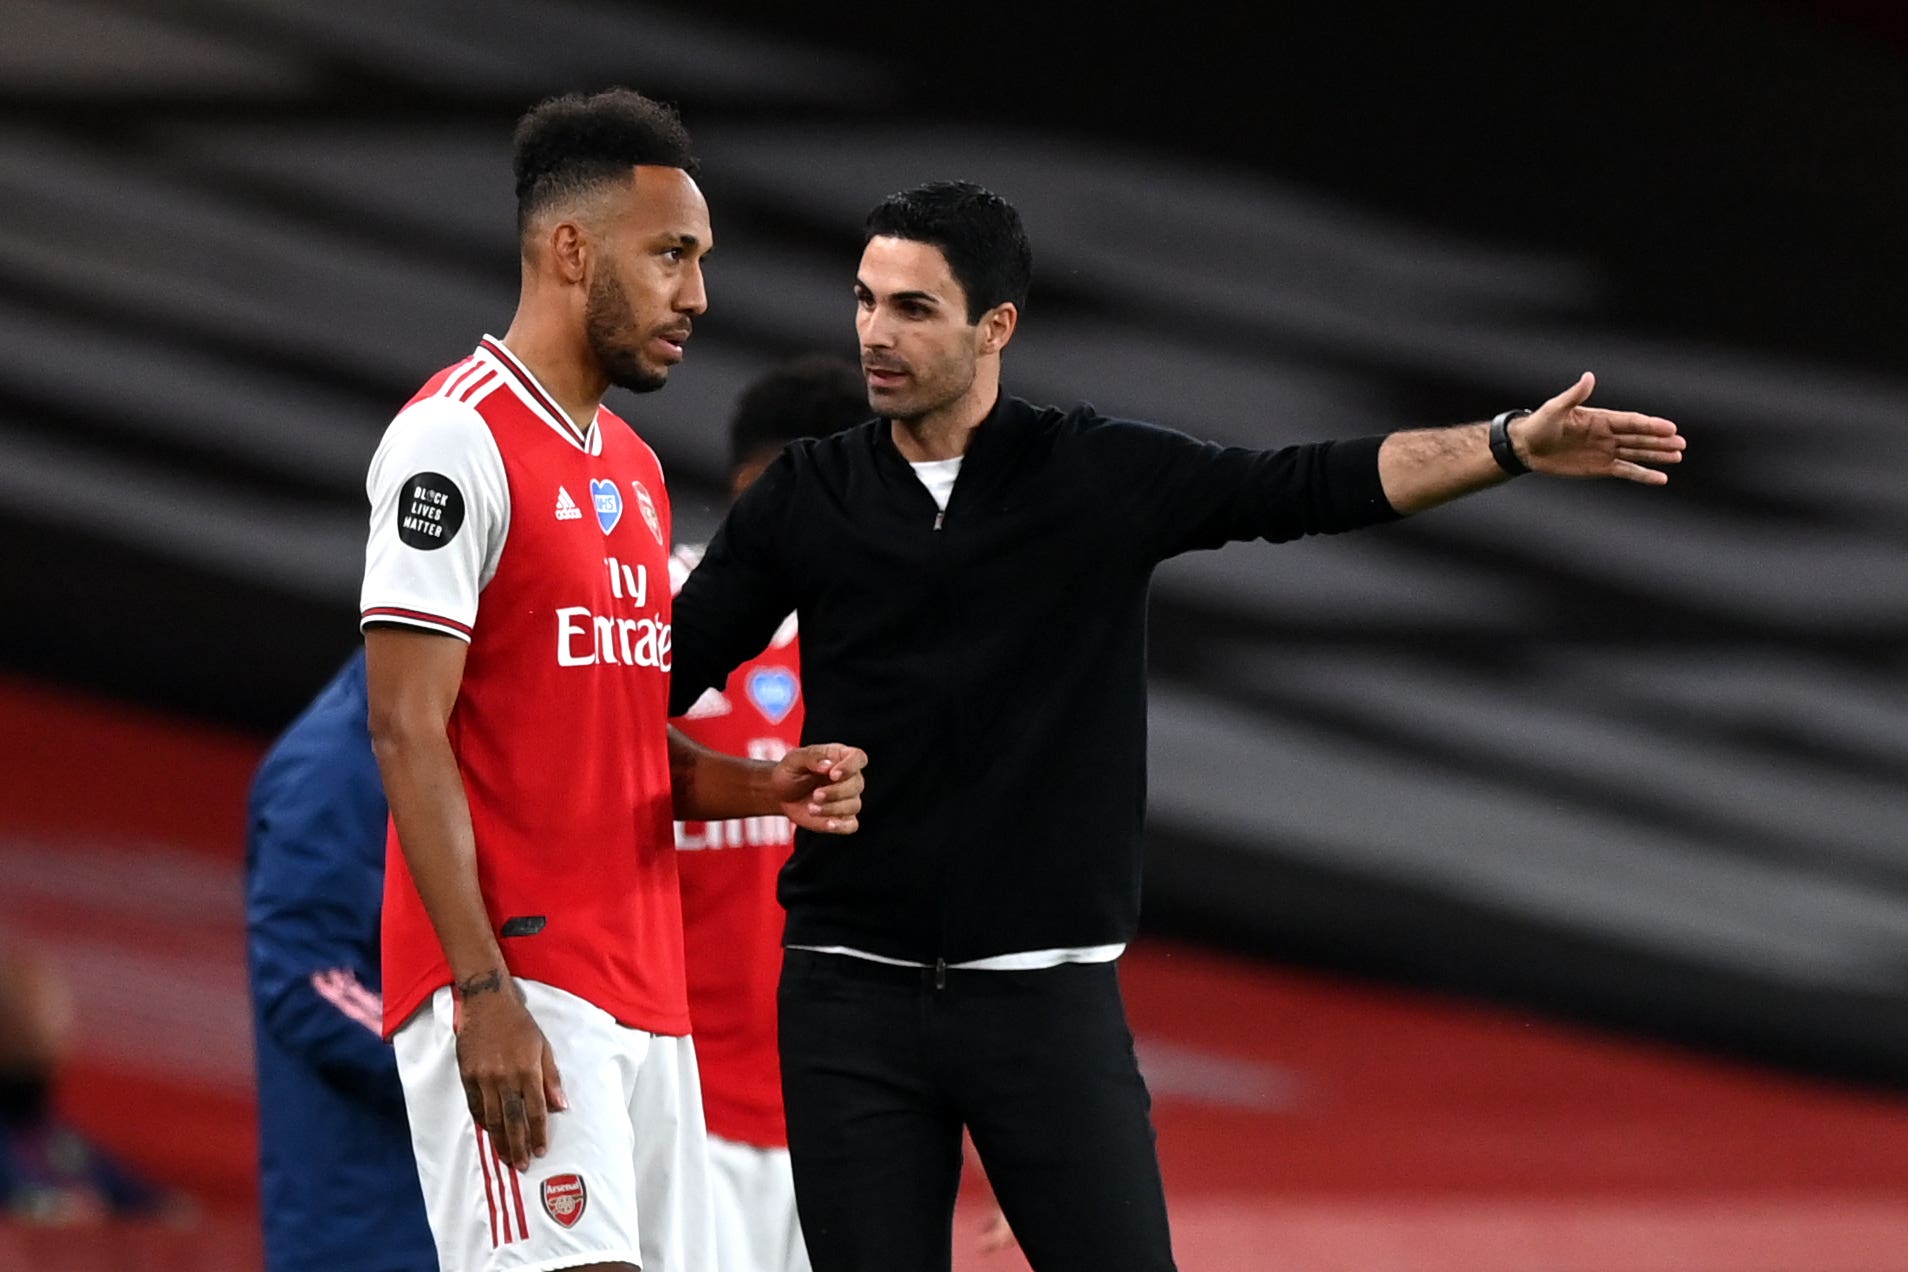 Arteta said he knew he had lost Aubameyang’s trust by the look in his eyes